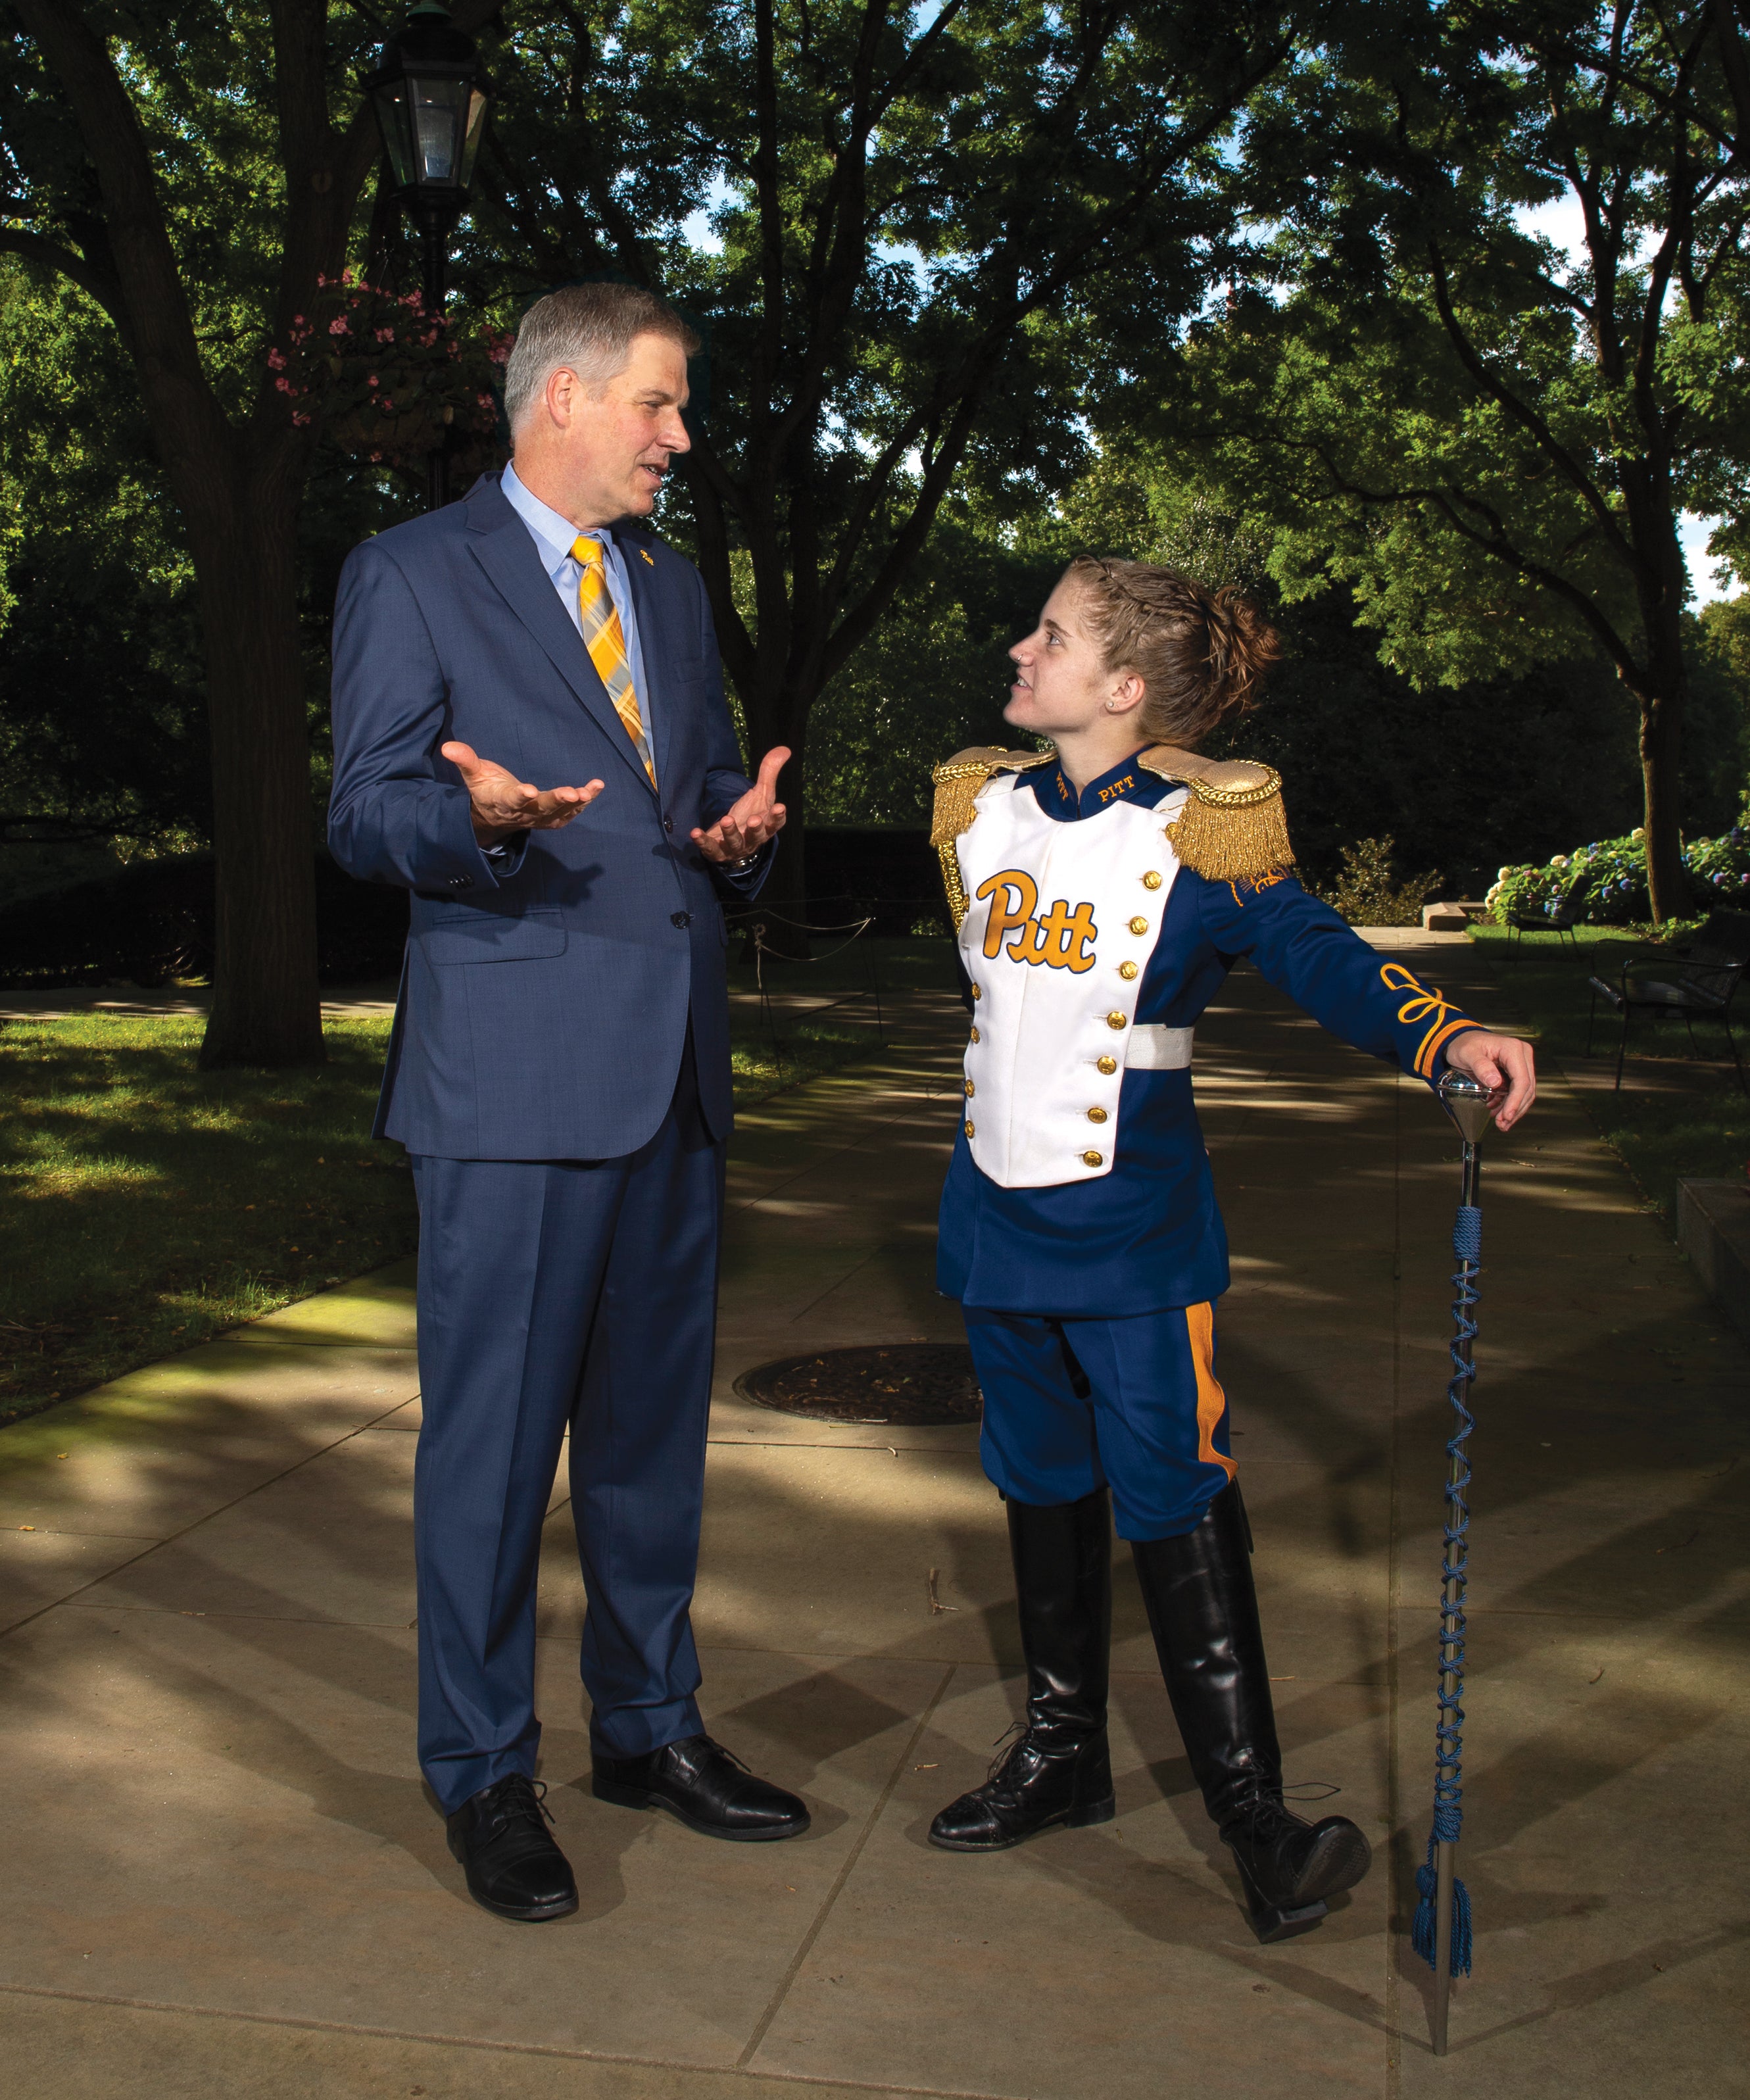 Chancellor Patrick Gallagher and Crissy Shannon talk Pitt Band on the Cathedral lawn